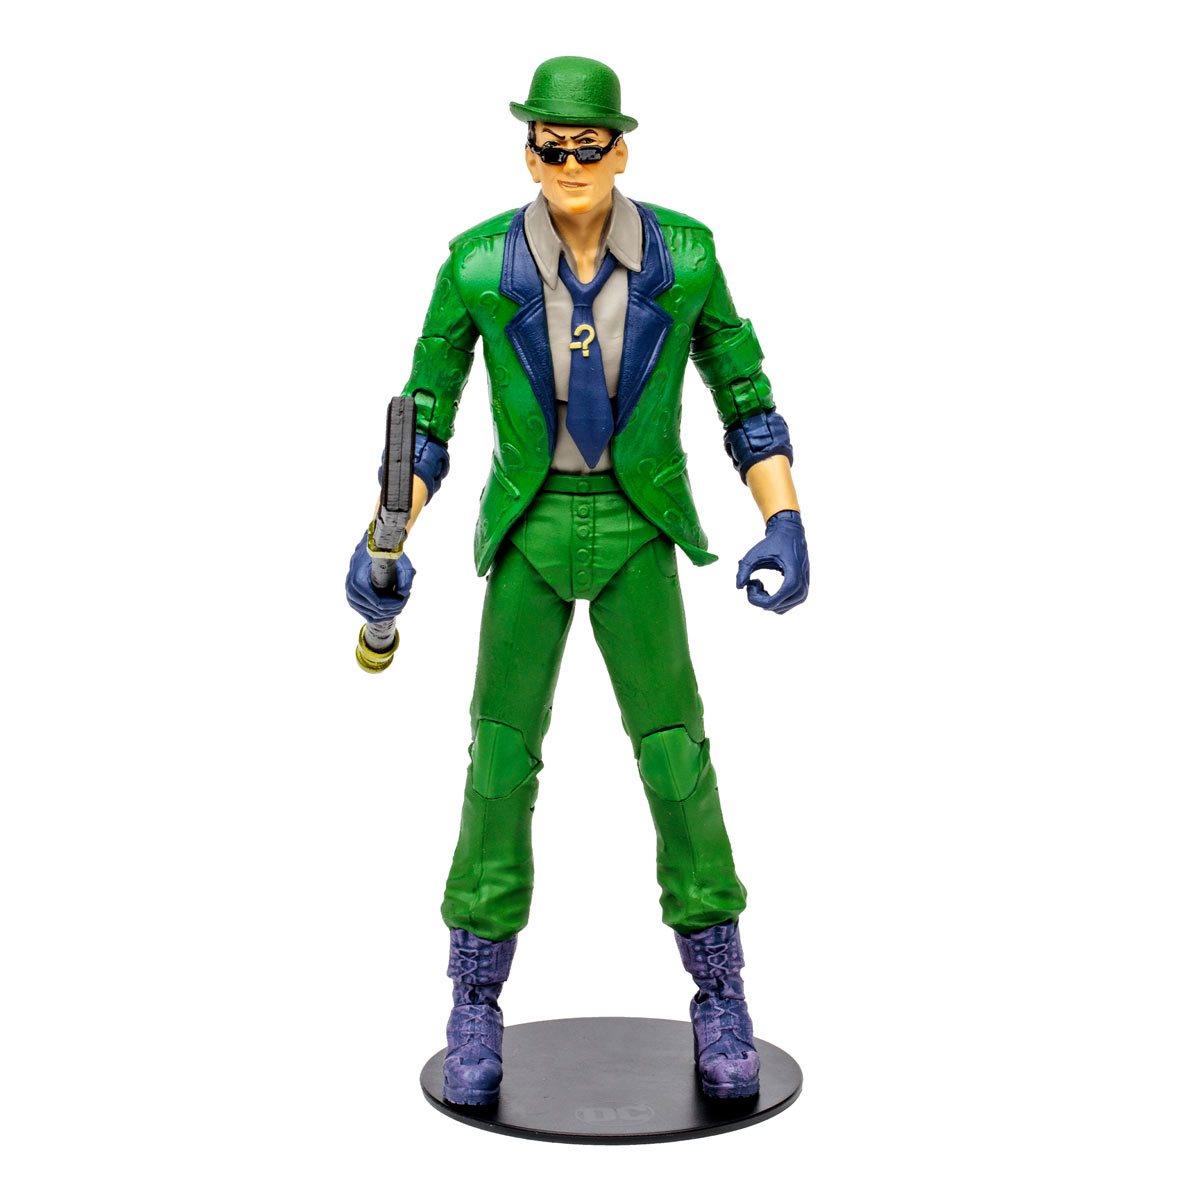 McFarlane Toys DC Gaming Wave 9 The Riddler Arkham City 7-Inch Scale Action Figure - BumbleToys - 18+, 6+ Years, Action Figures, Boys, collectible, collectors, dup-review-publication, Figures, McFarlane Toys, OXE, Pre-Order